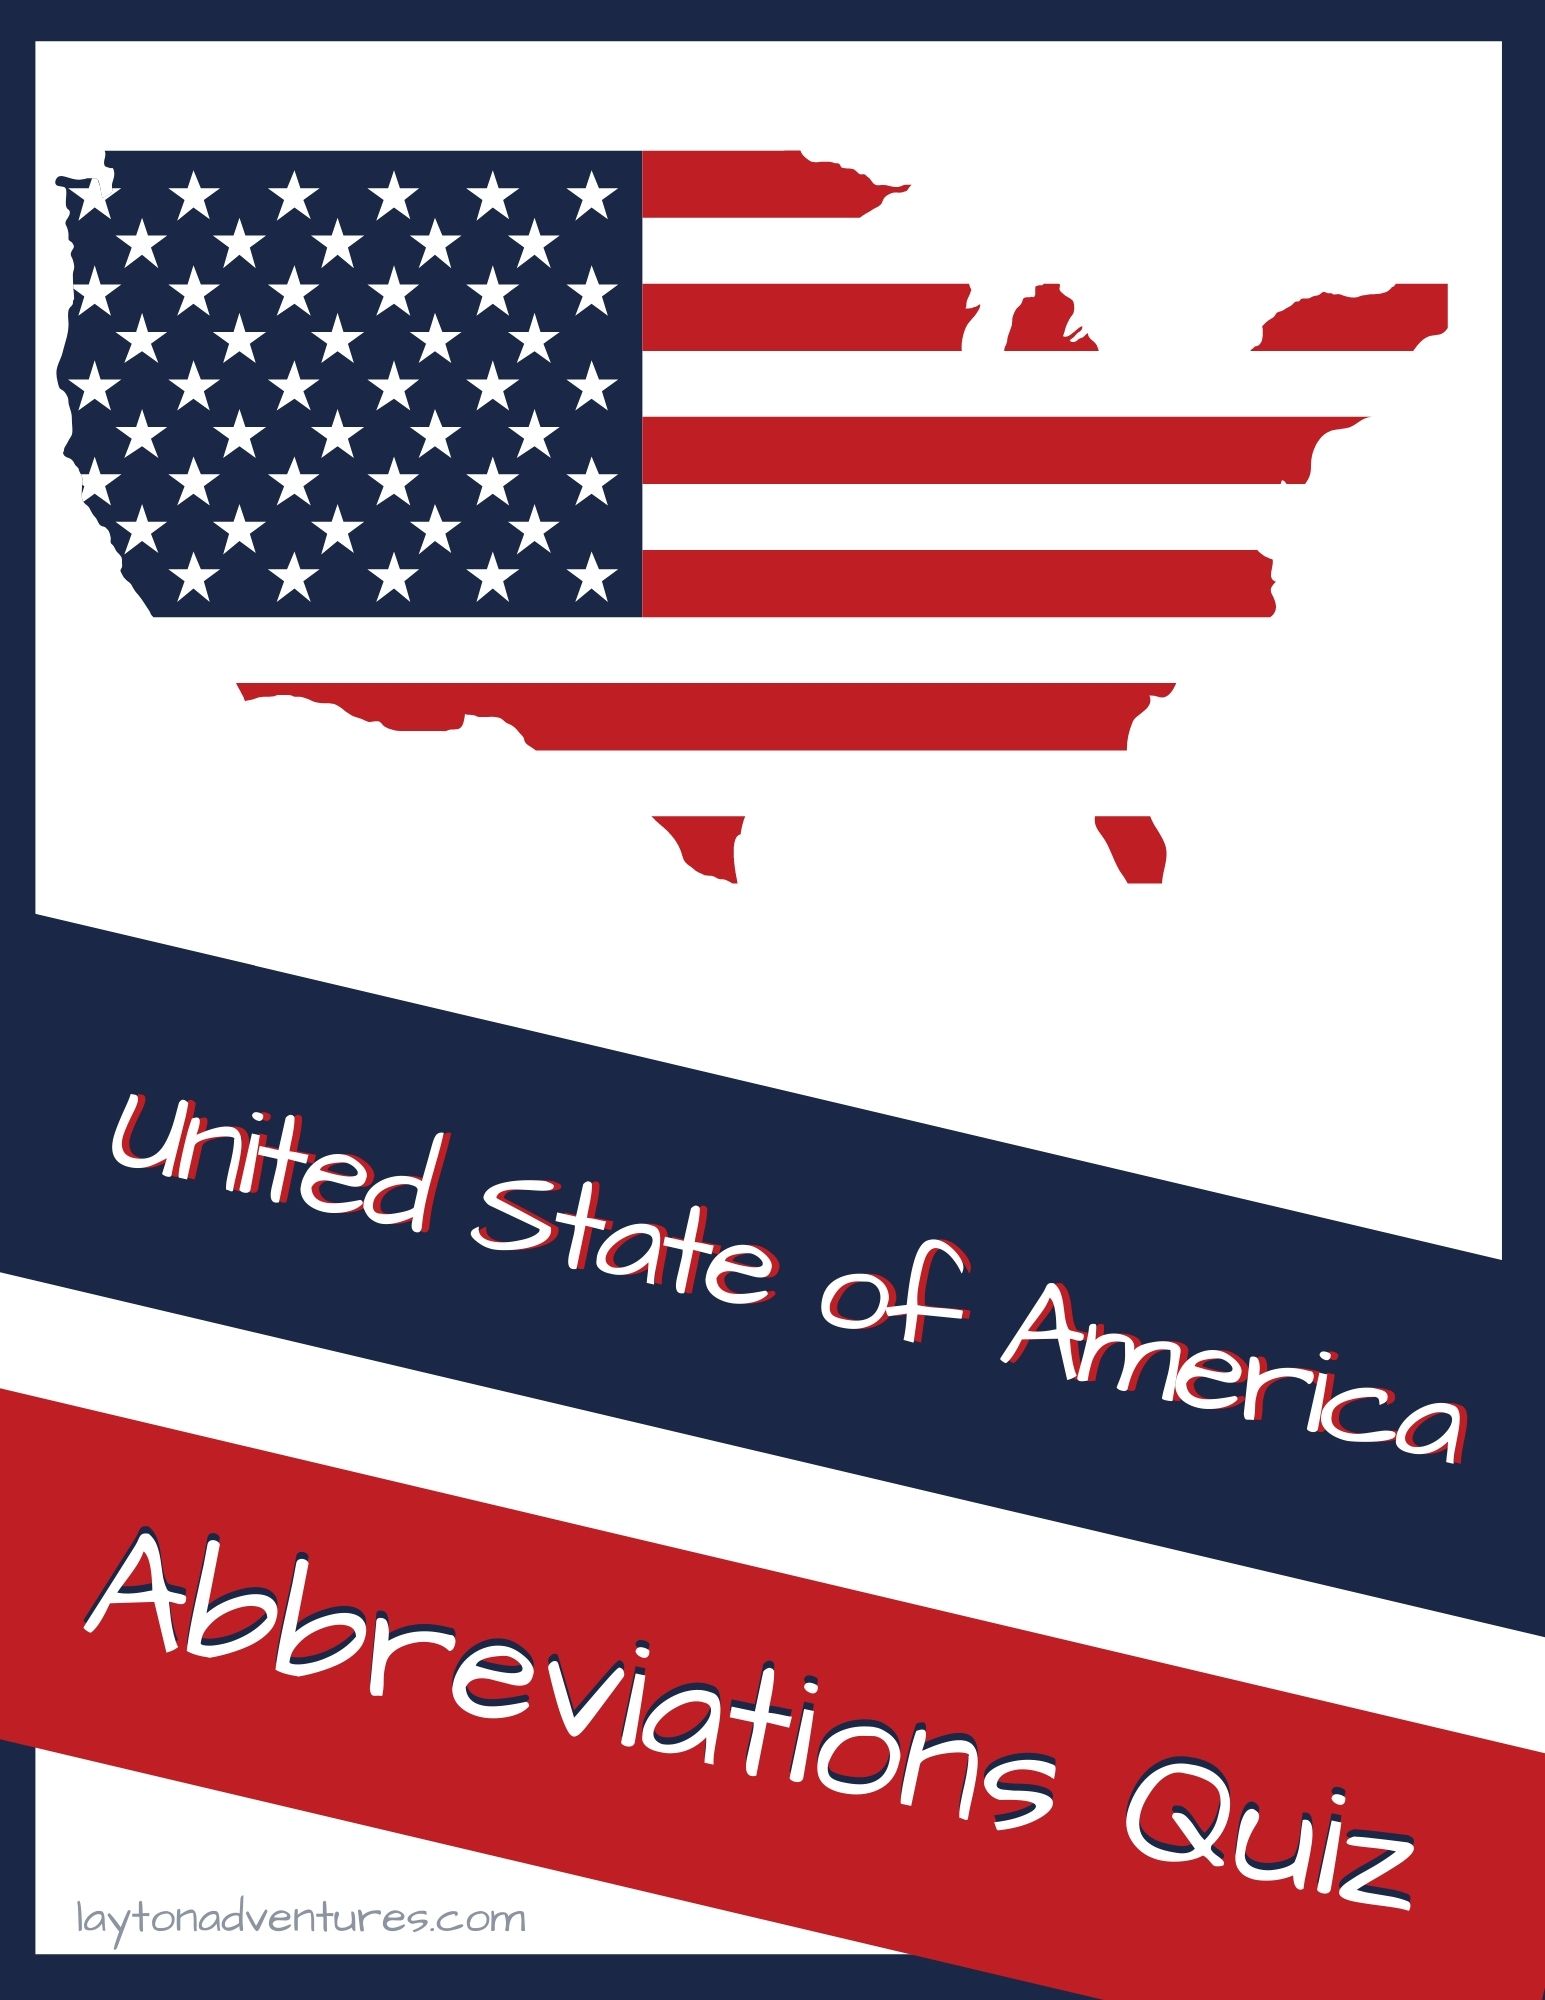 State quiz. States abbreviation Quiz. Us States abbreviations. Facts about USA.